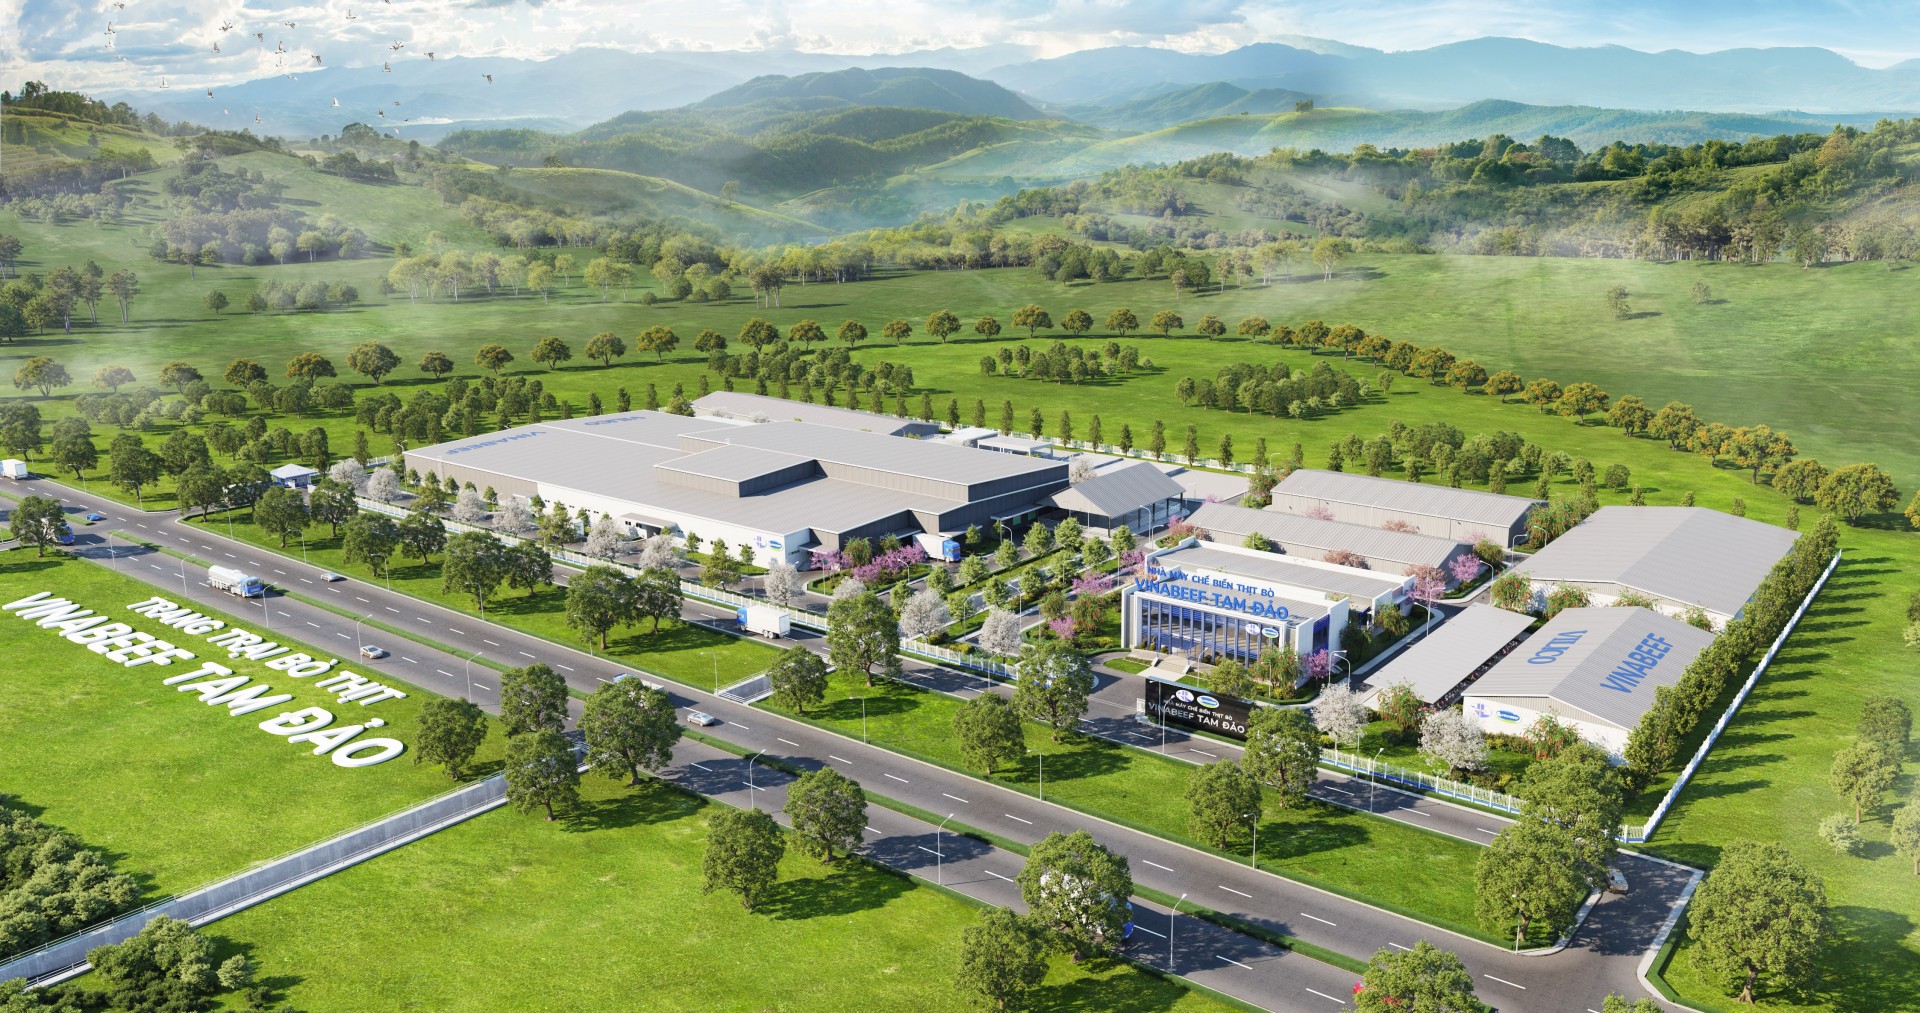 An artist’s rendition of the Vinabeef Tam Dao livestock and beef processing complex